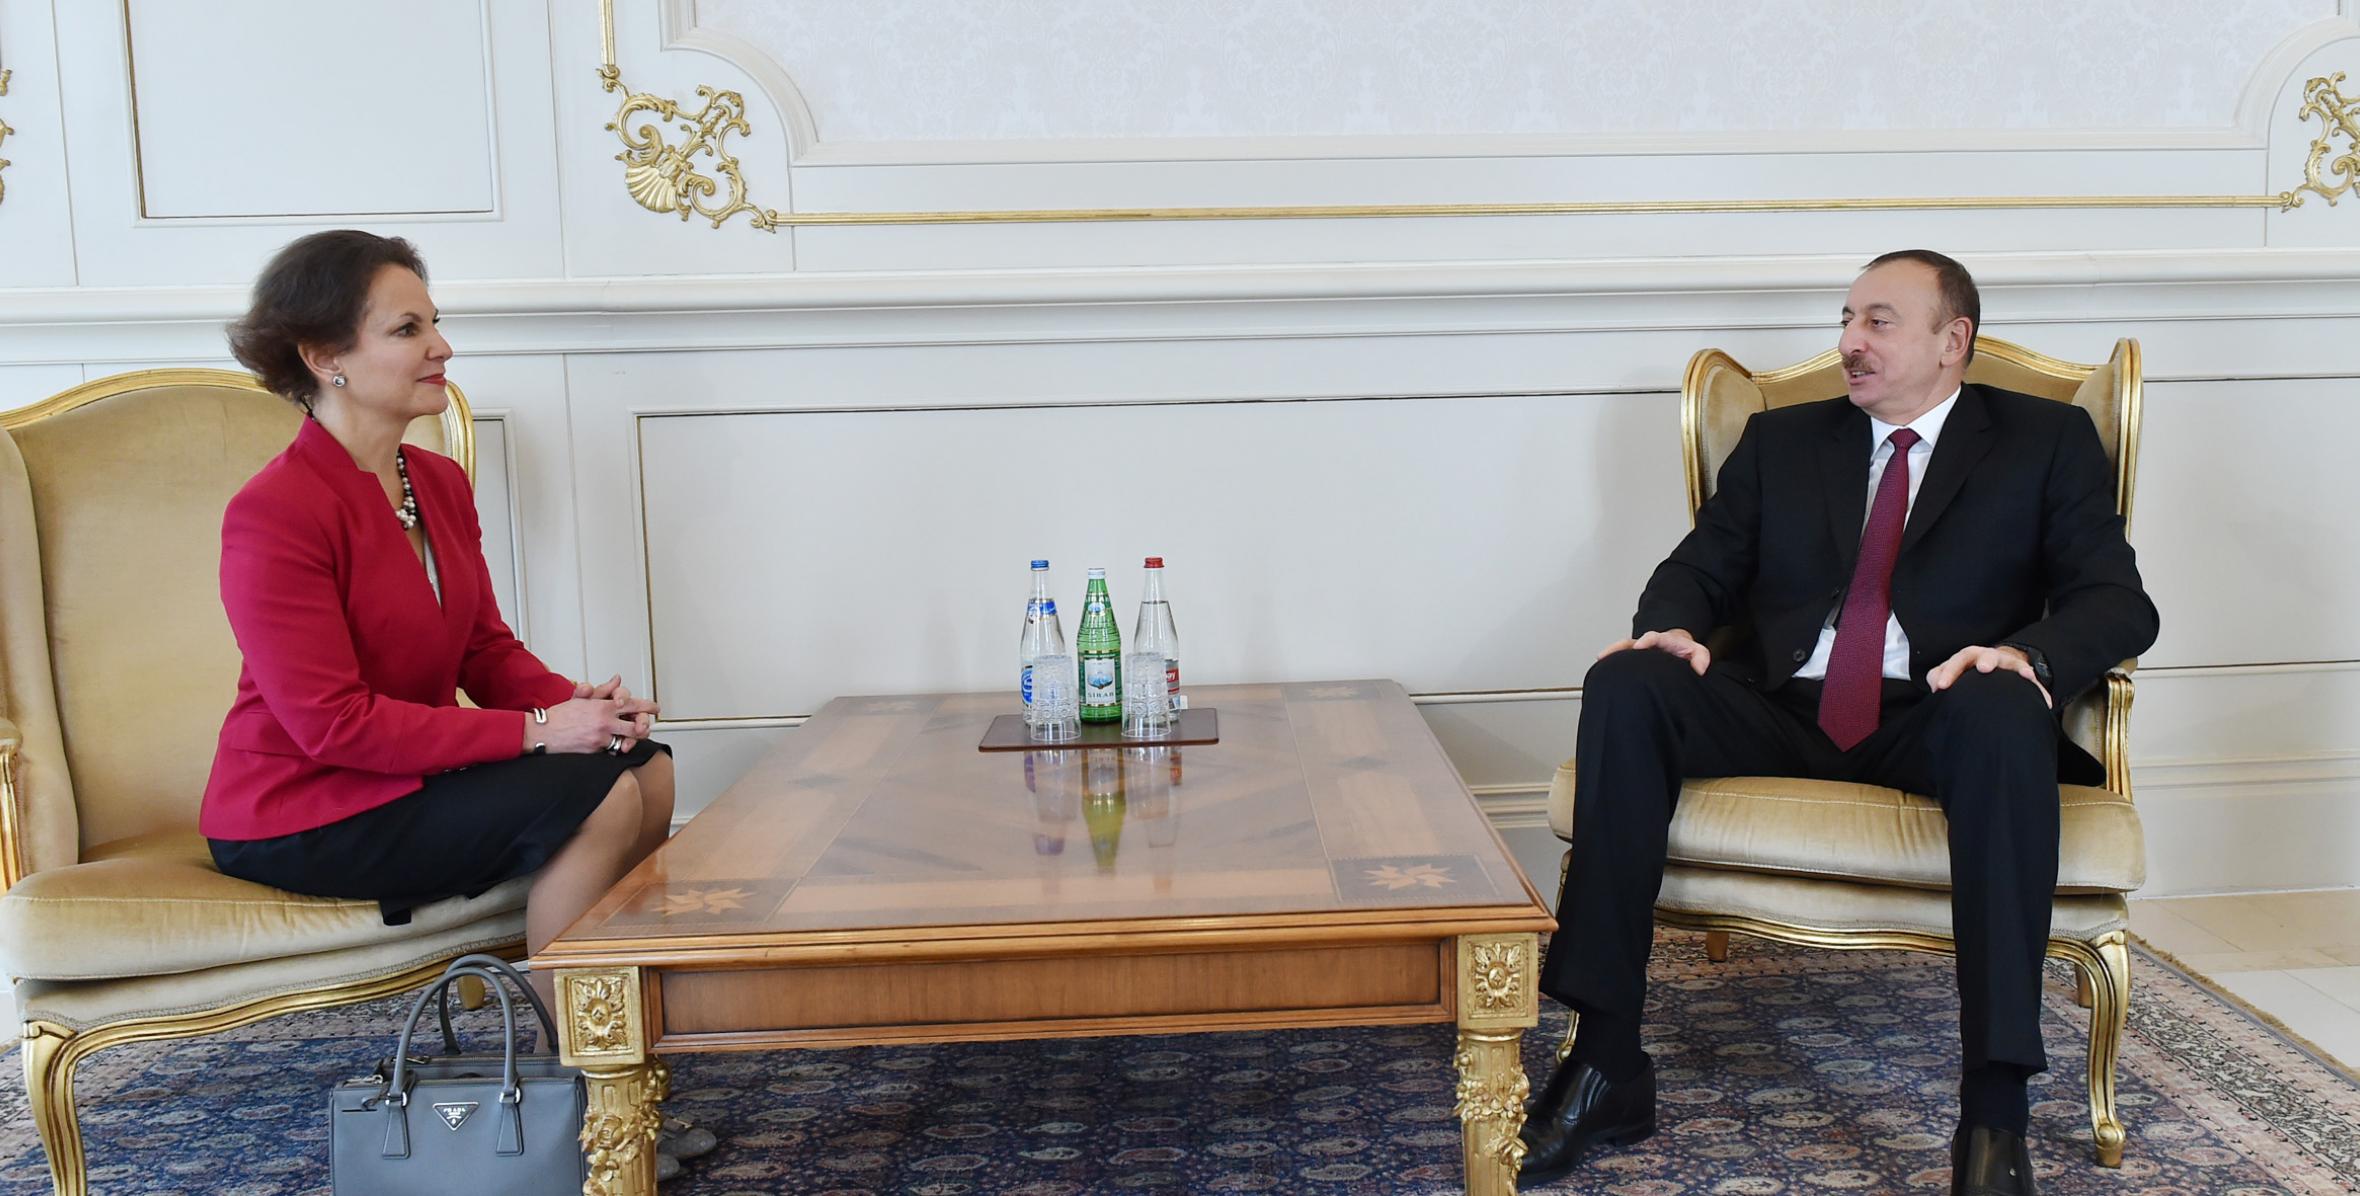 Ilham Aliyev received the credentials of the incoming French Ambassador